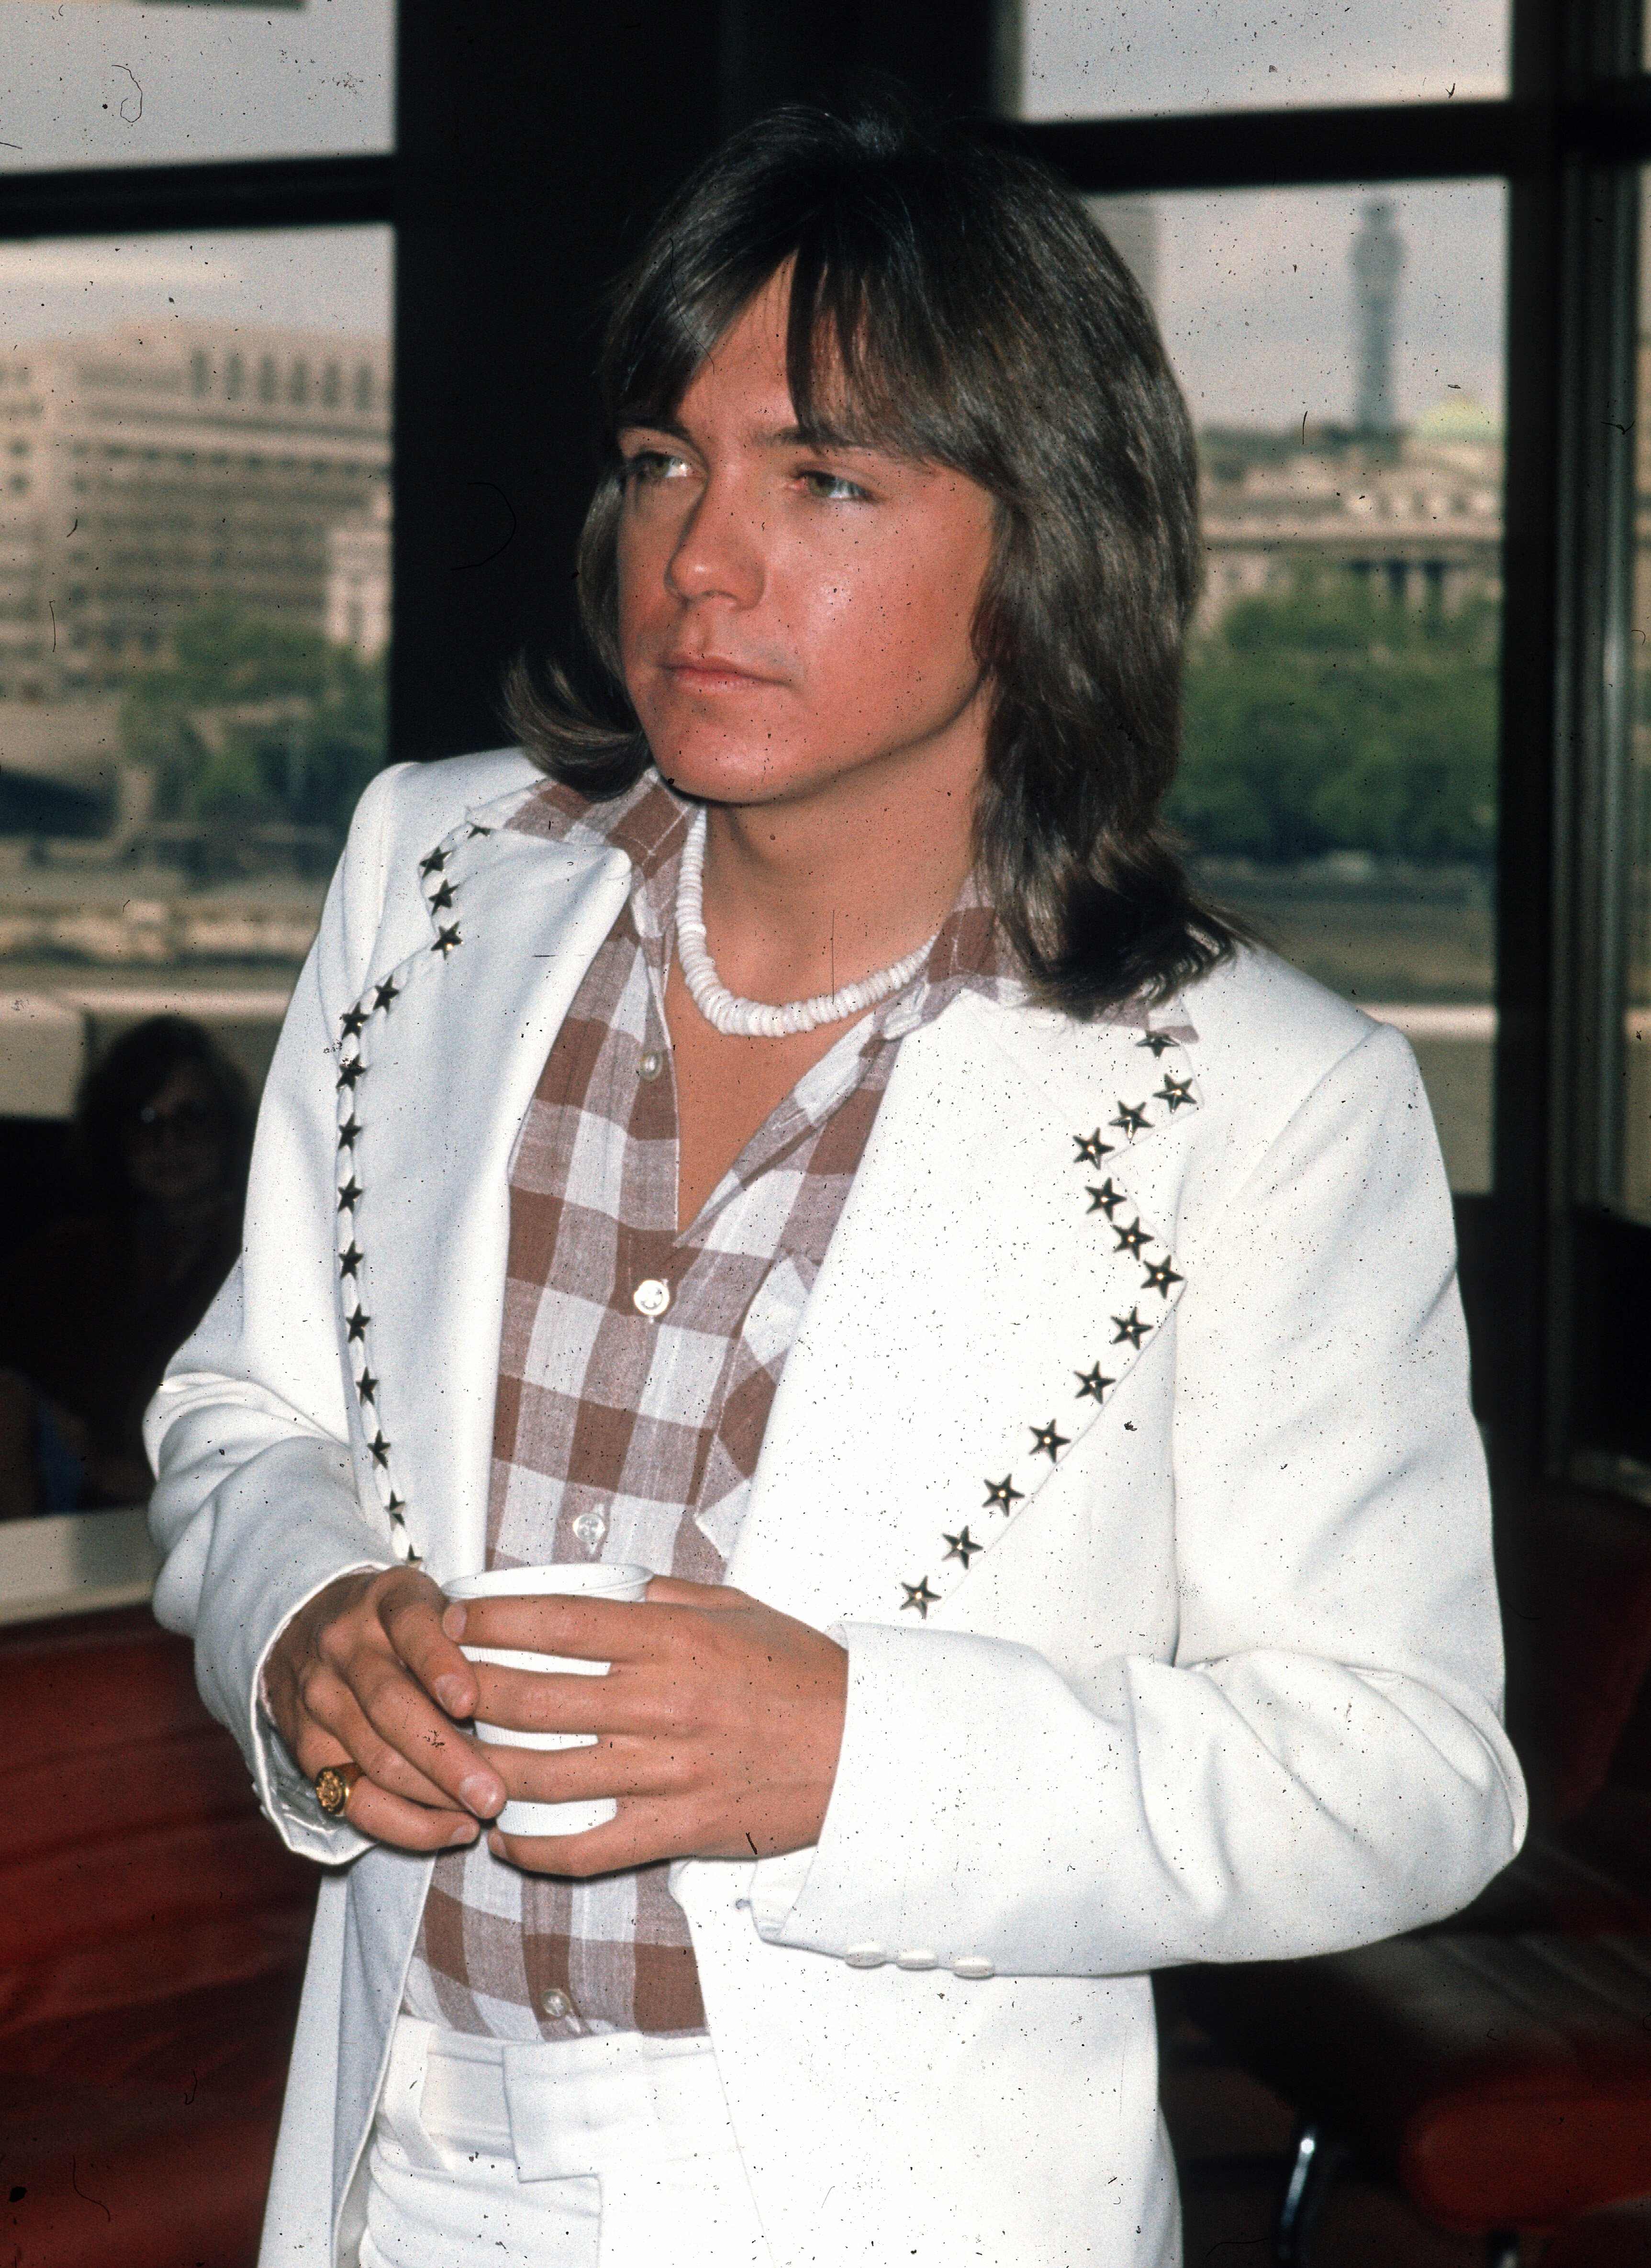 David Cassidy at a press conference in the LWT studios on May 25, 1974 London, England. | Photo: Getty Images